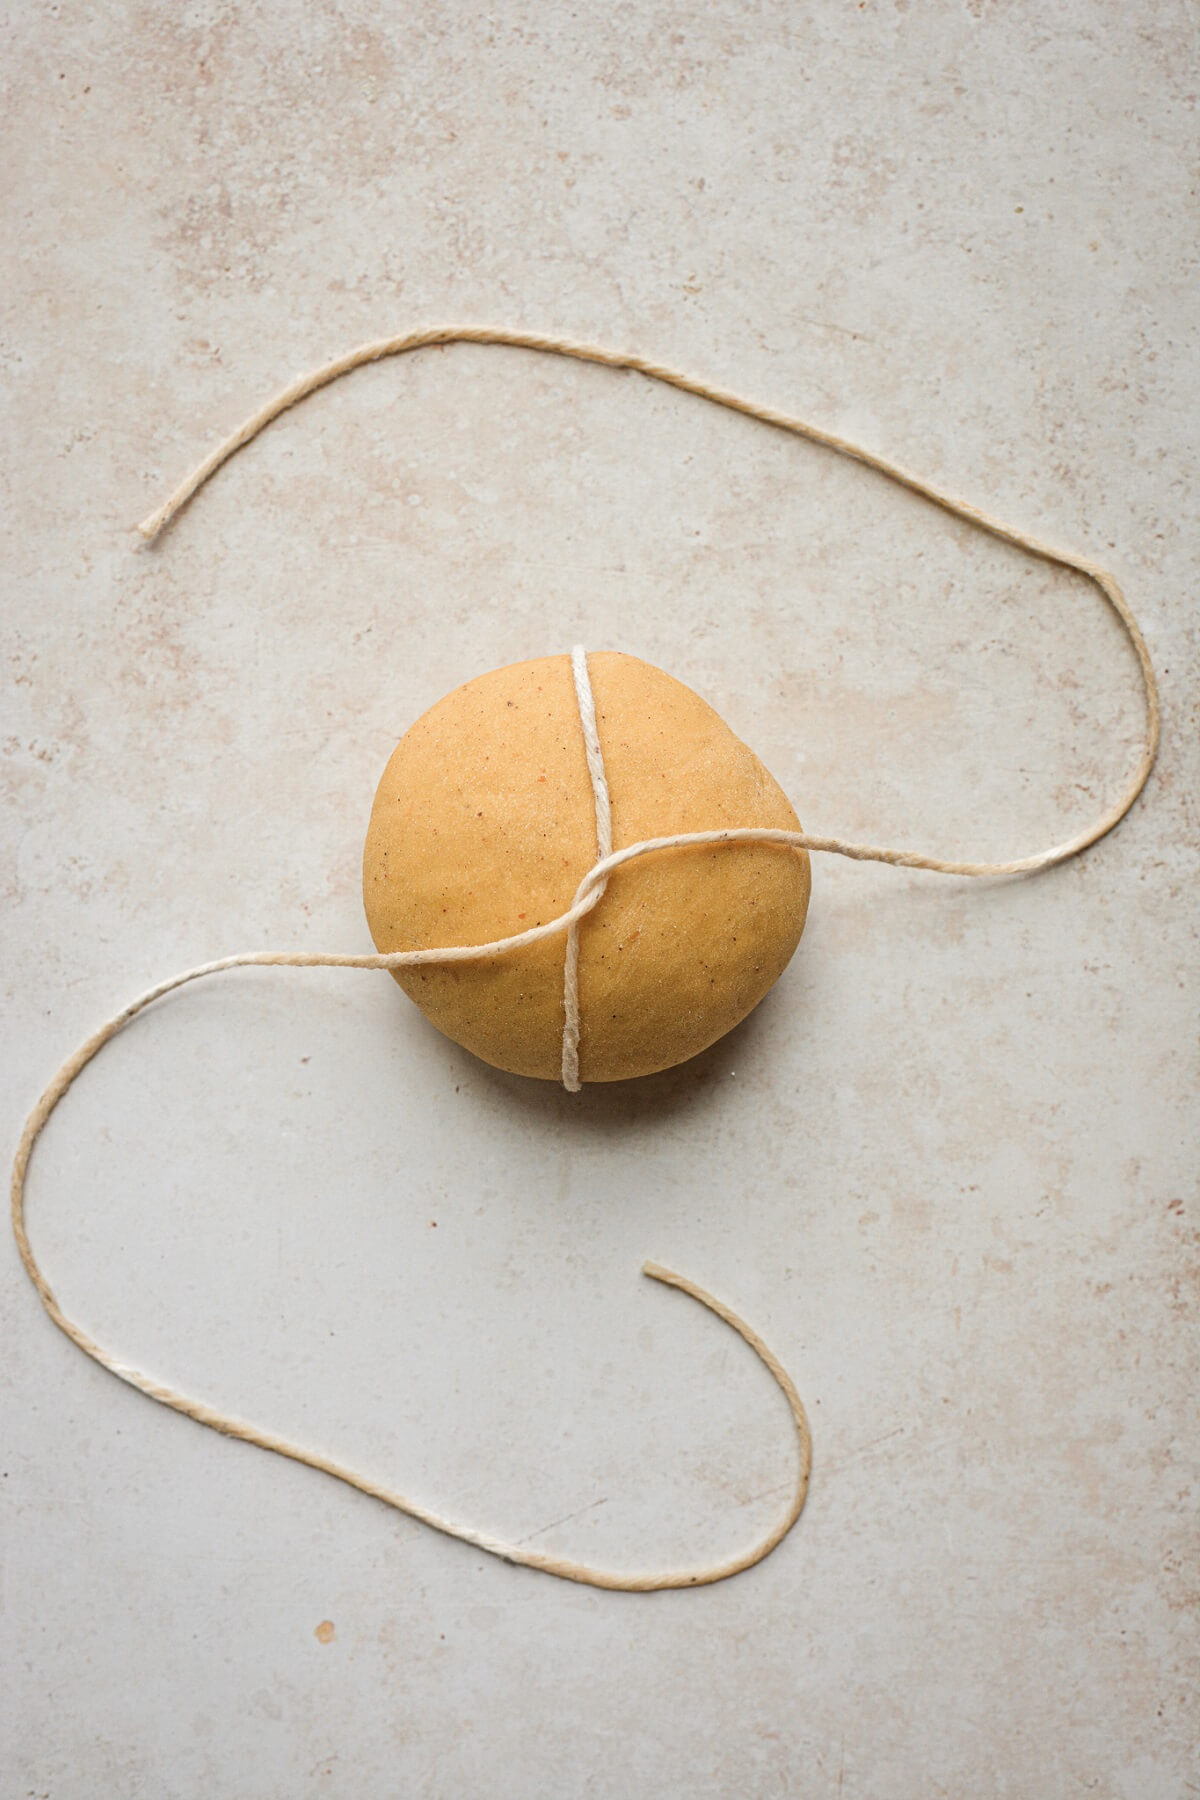 Step 2 for tying pumpkin shaped dinner rolls with twine.